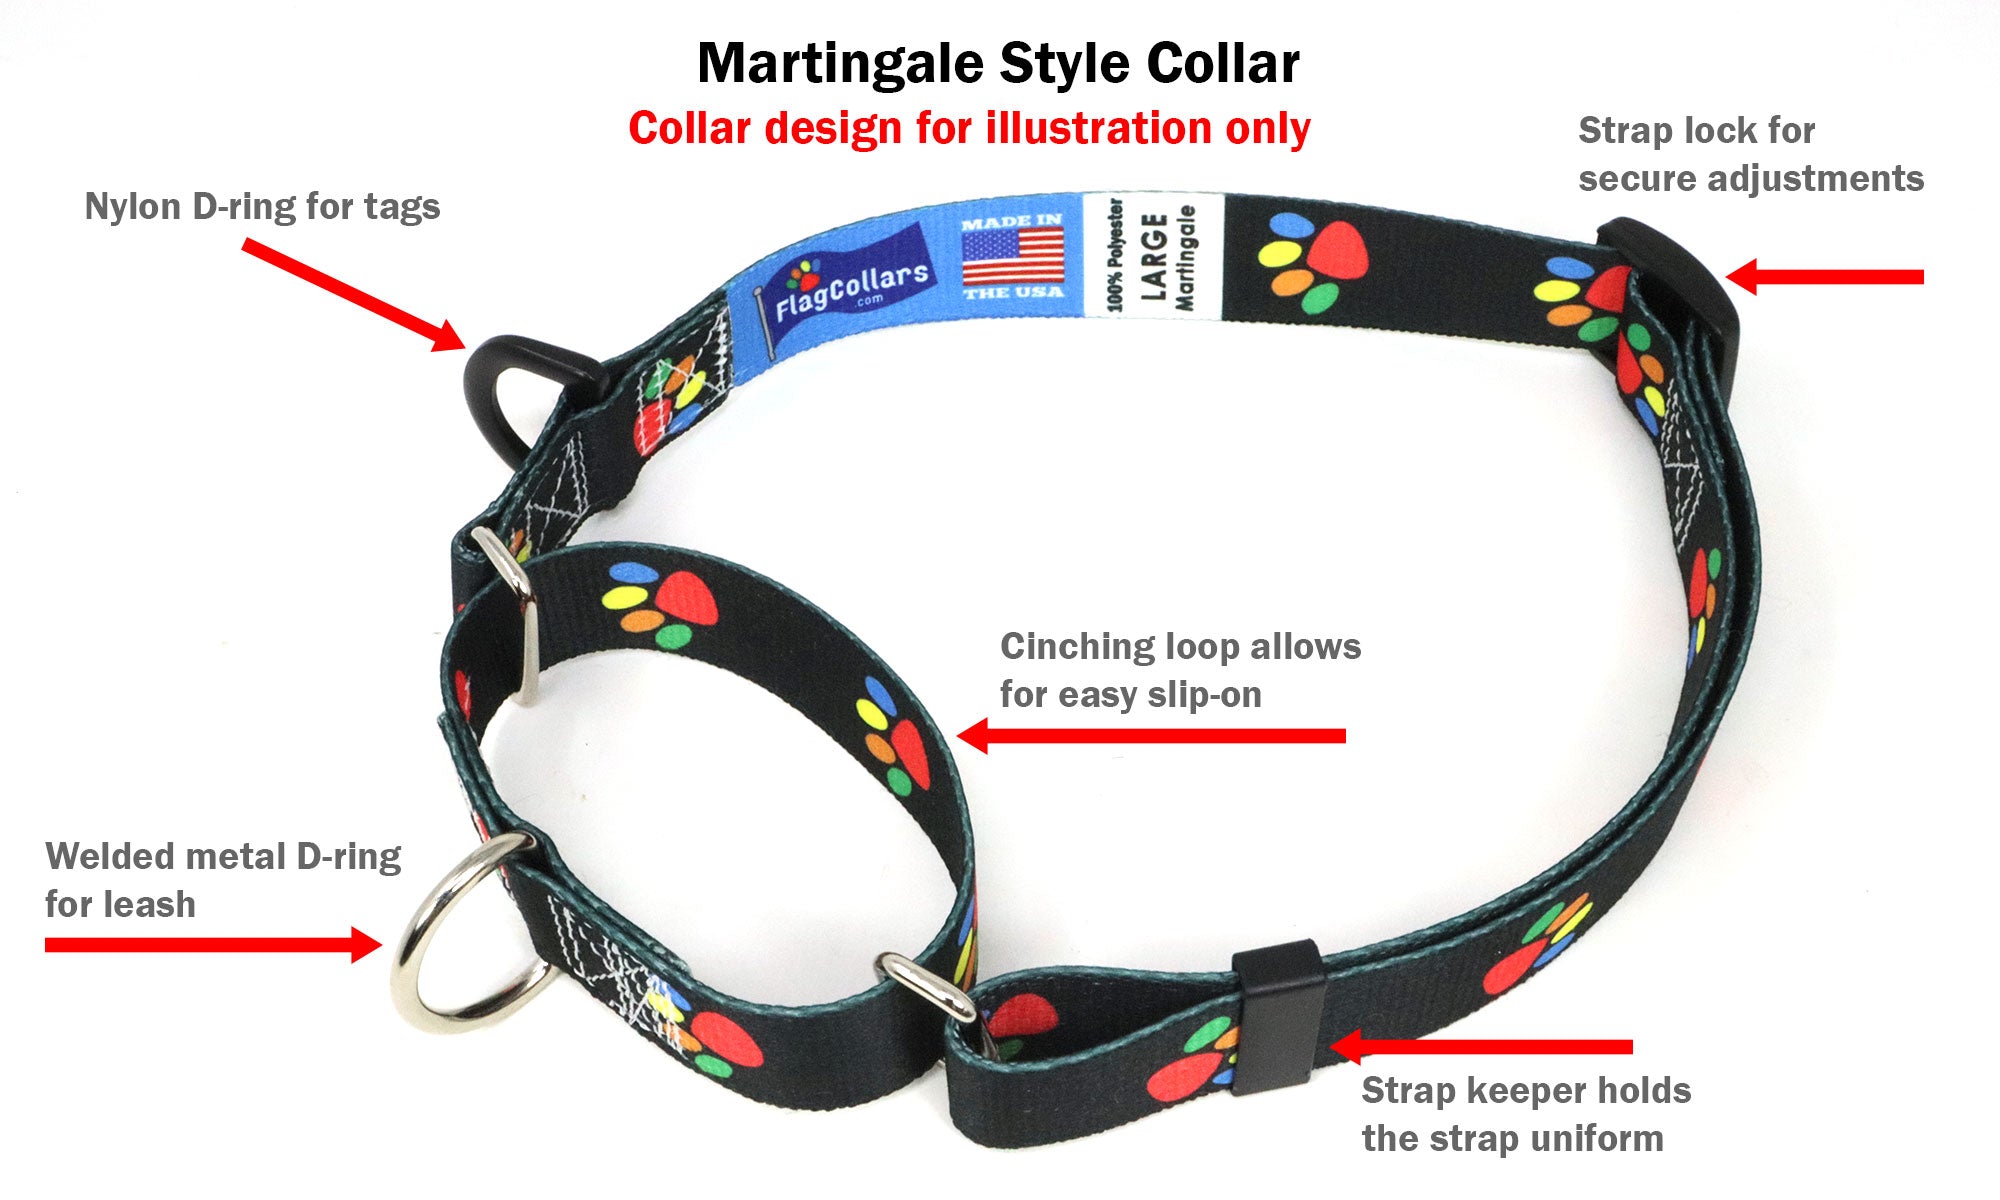 New Zealand Dog Collar | Quick Release or Martingale Style | Made in NJ, USA